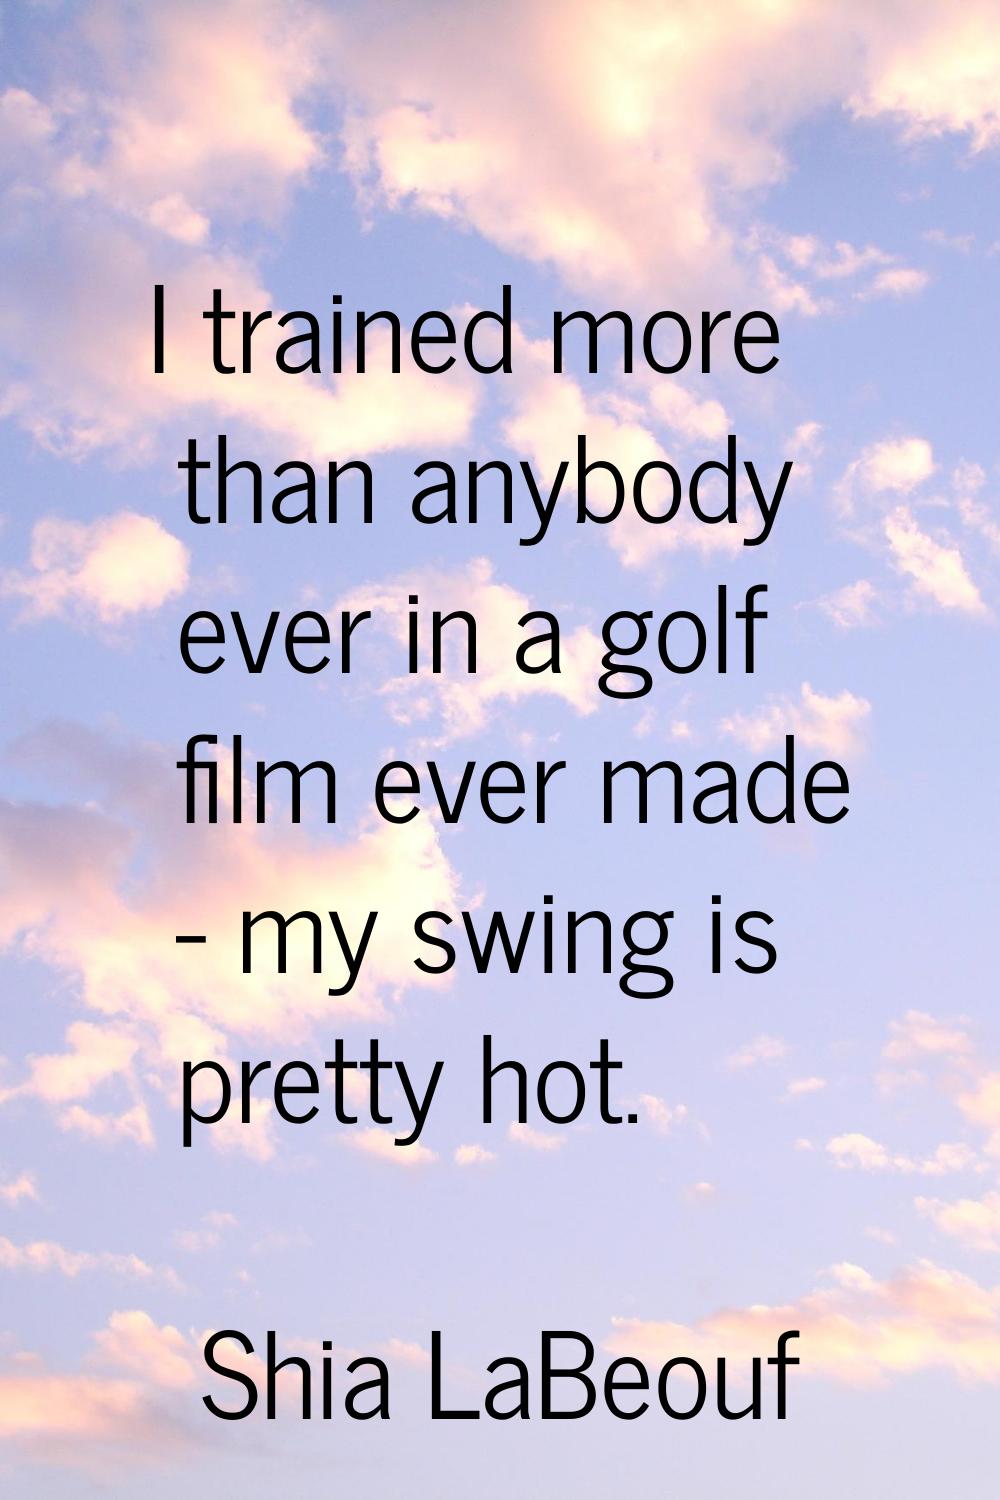 I trained more than anybody ever in a golf film ever made - my swing is pretty hot.